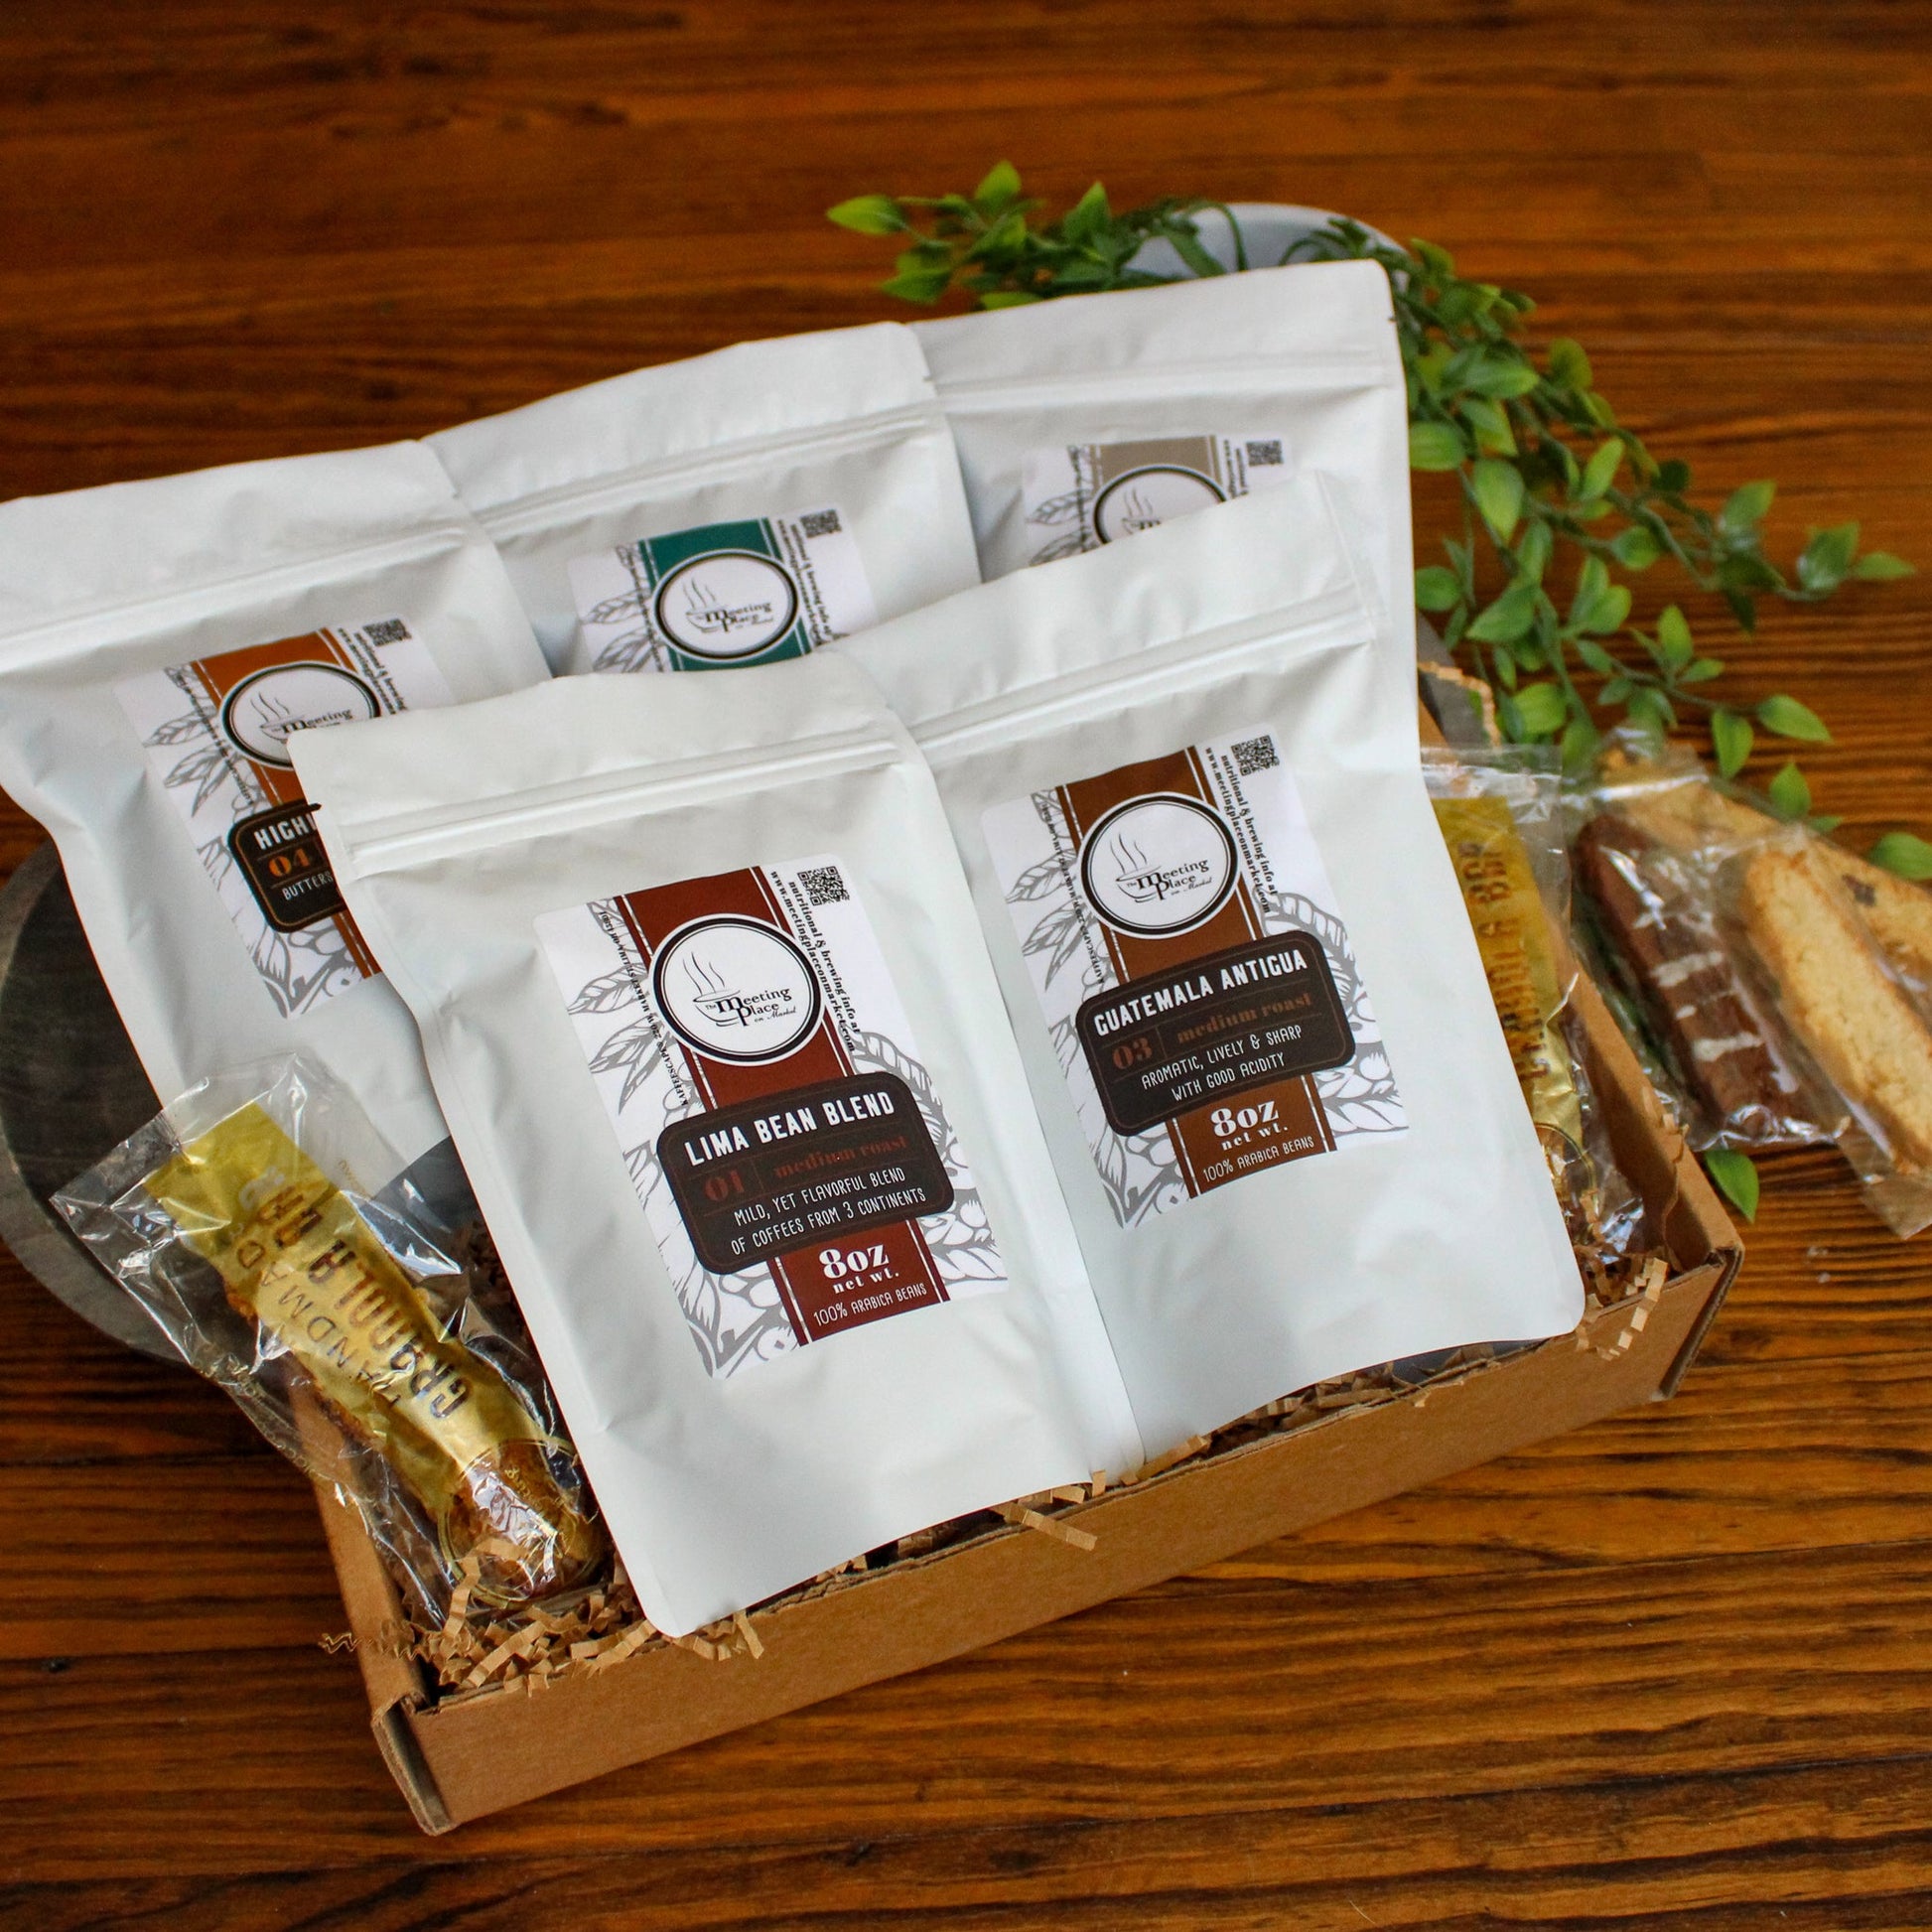 Deluxe Coffee Gift Basket, Corporate Gift Baskets, Coffee for a Group Corporate Gift Baskets - The Meeting Place on Market